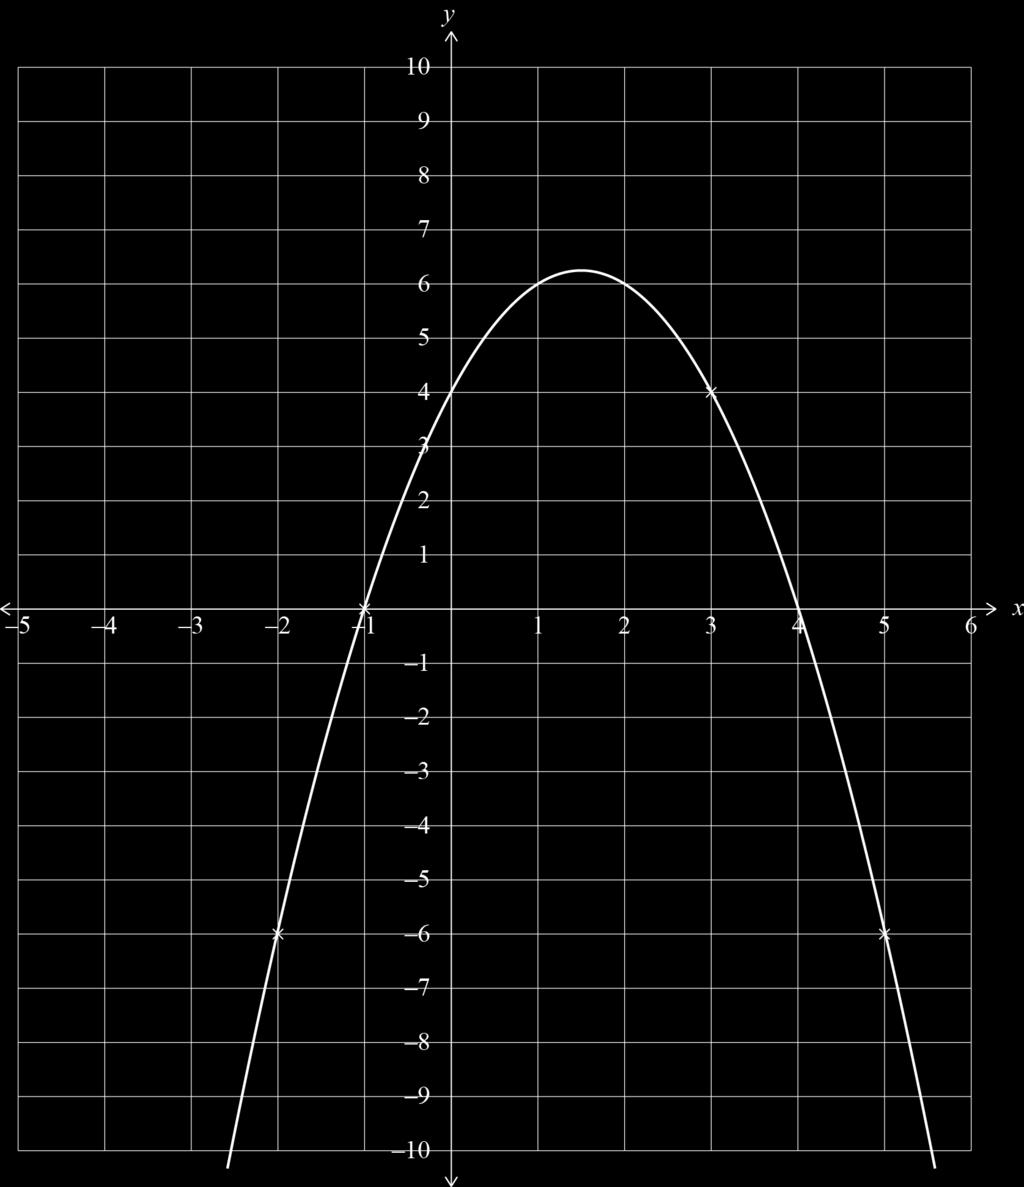 (Does not have to be coordinates.) Symmetrical parabola. Totally correct, giving coordinates of intercepts and vertex and correct graph. Symmetrical parabola. x-intercepts ( 1,0) and (4,0) y-intercept (0,4) Max coordinates (1.